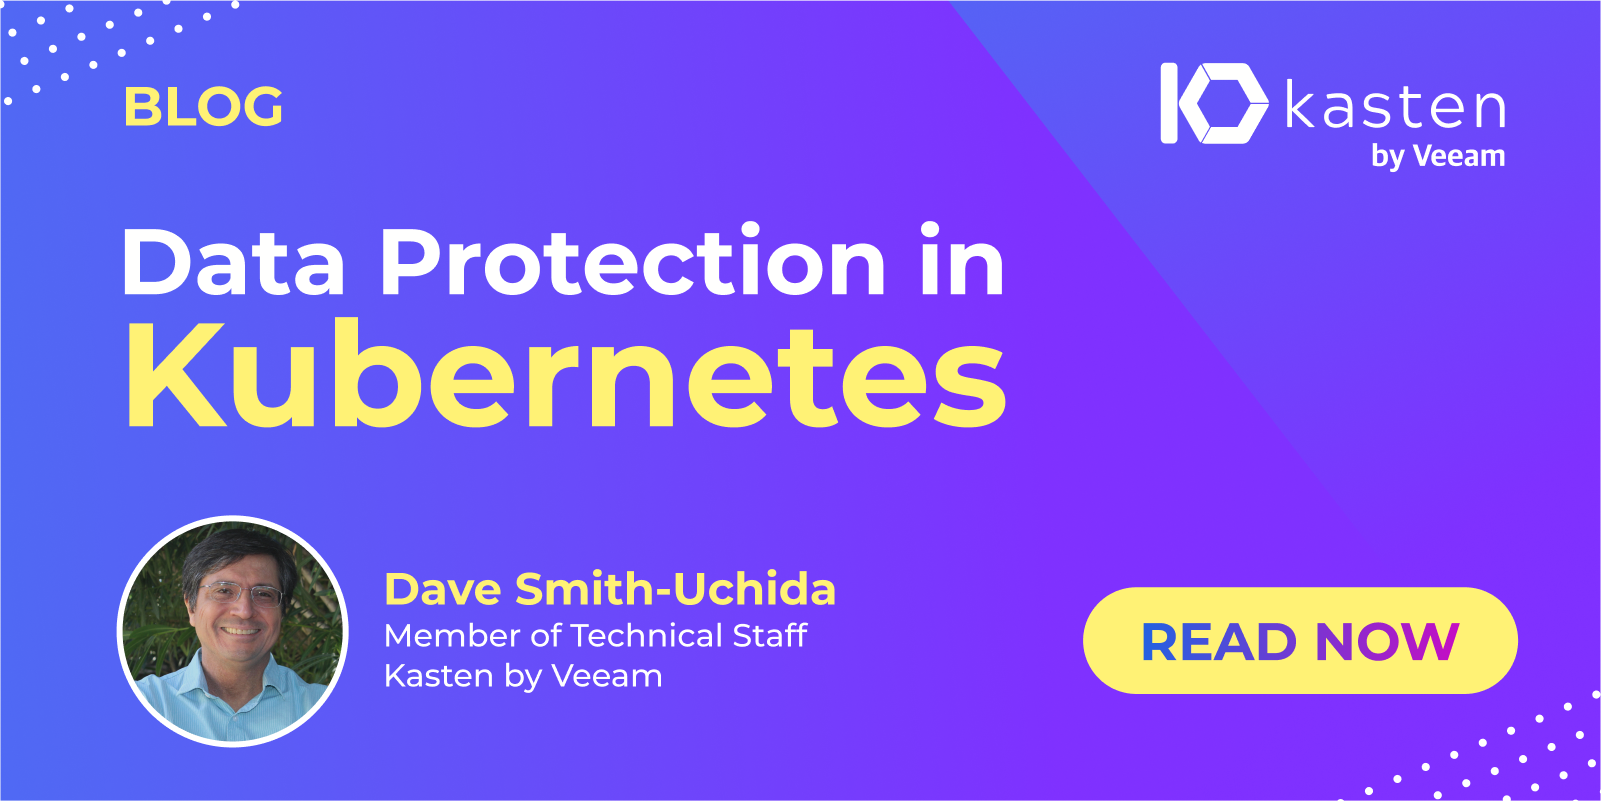 Data Protection in Kubernetes